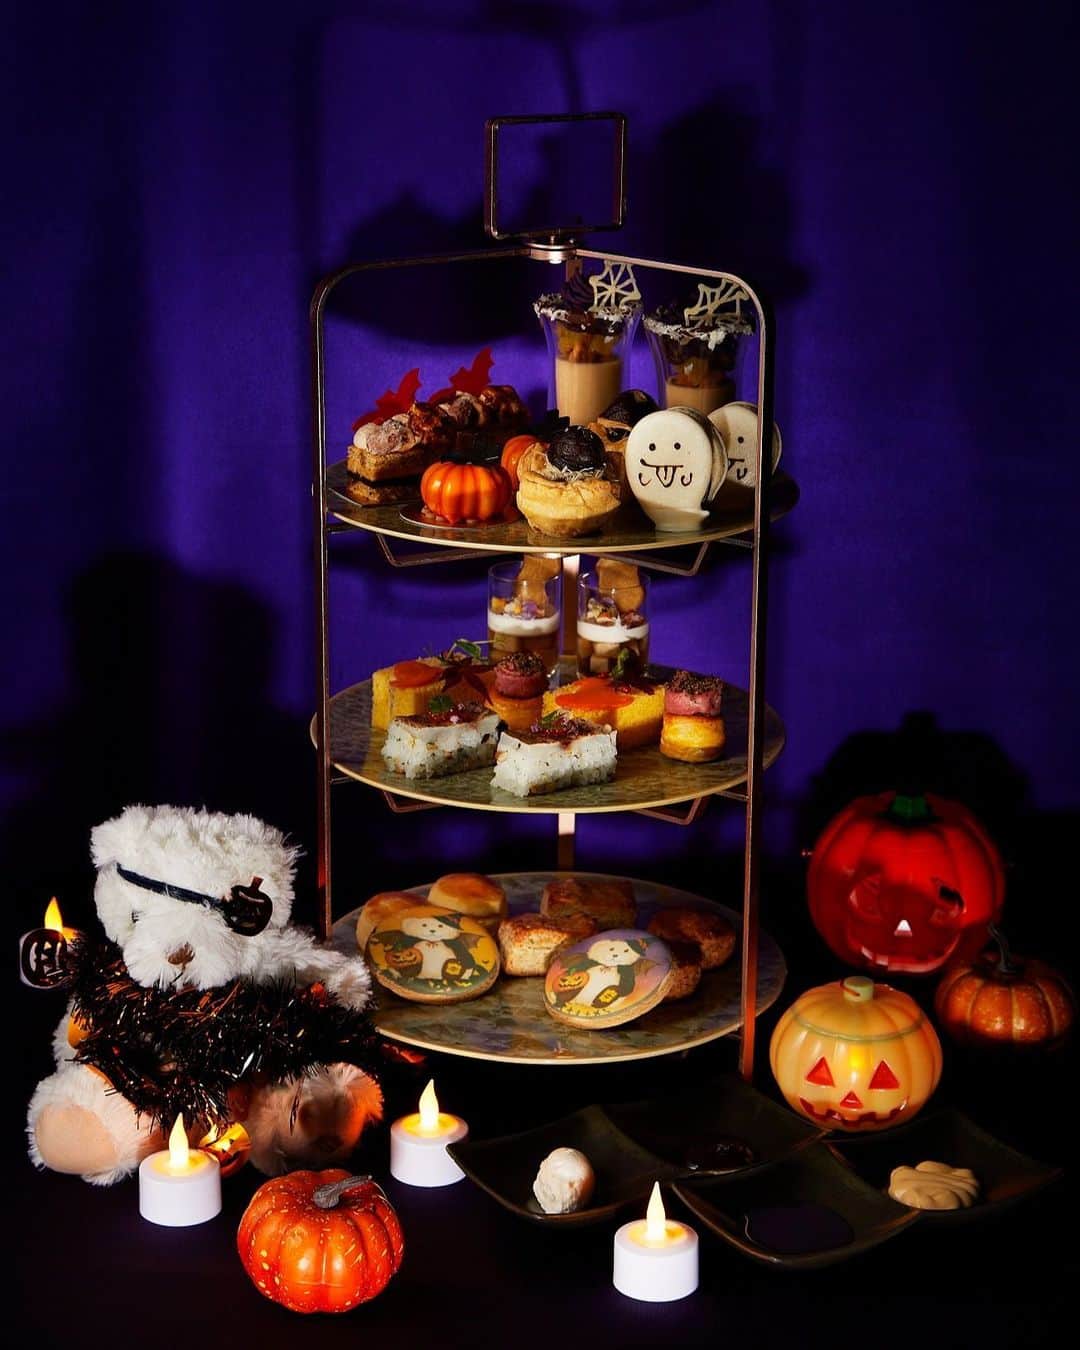 Shangri-La Hotel, Tokyoさんのインスタグラム写真 - (Shangri-La Hotel, TokyoInstagram)「いよいよ10月から「ハロウィンアフタヌーンティー」の登場です。⁣ ⁣ 今シーズンは、北海道産のかぼちゃをはじめ、栗やさつまいもからサンマまで、秋を代表する旬の食材もふんだんに使用。この季節ならではの味覚を詰め込んだ秋のラインナップでお届けいたします。⁣ ⁣ 愛らしいおばけマカロンなど10月限定のアフタヌーンティーで、ハロウィン気分をお楽しみください。⁣ ⁣ Our popular "Halloween Afternoon Tea" is now standing by to start from October 1.⁣ ⁣ This season, plenty of seasonal representatives of autumn, including pumpkins from Hokkaido, chestnuts, sweet potatoes, and saury decorate the three-tier tea stand in a chic manner. ⁣ ⁣ Halloween spirit with our October-only Afternoon Tea featuring adorable ghost macaroons and spiders' webs made of chocolate. ⁣ Trick or treat!⁣ ⁣ #shangrilacircle #myshangrila #shangrilahotels #shangrila #shangrilatokyo #tokyotravel #tokyotrip #tokyostation #afternoontea #halloween #シャングリラ #シャングリラ東京 #シャングリラサークル #東京駅 #丸の内 #大手町 #アフタヌーンティー #ハロウィン」9月27日 21時00分 - shangrila_tokyo